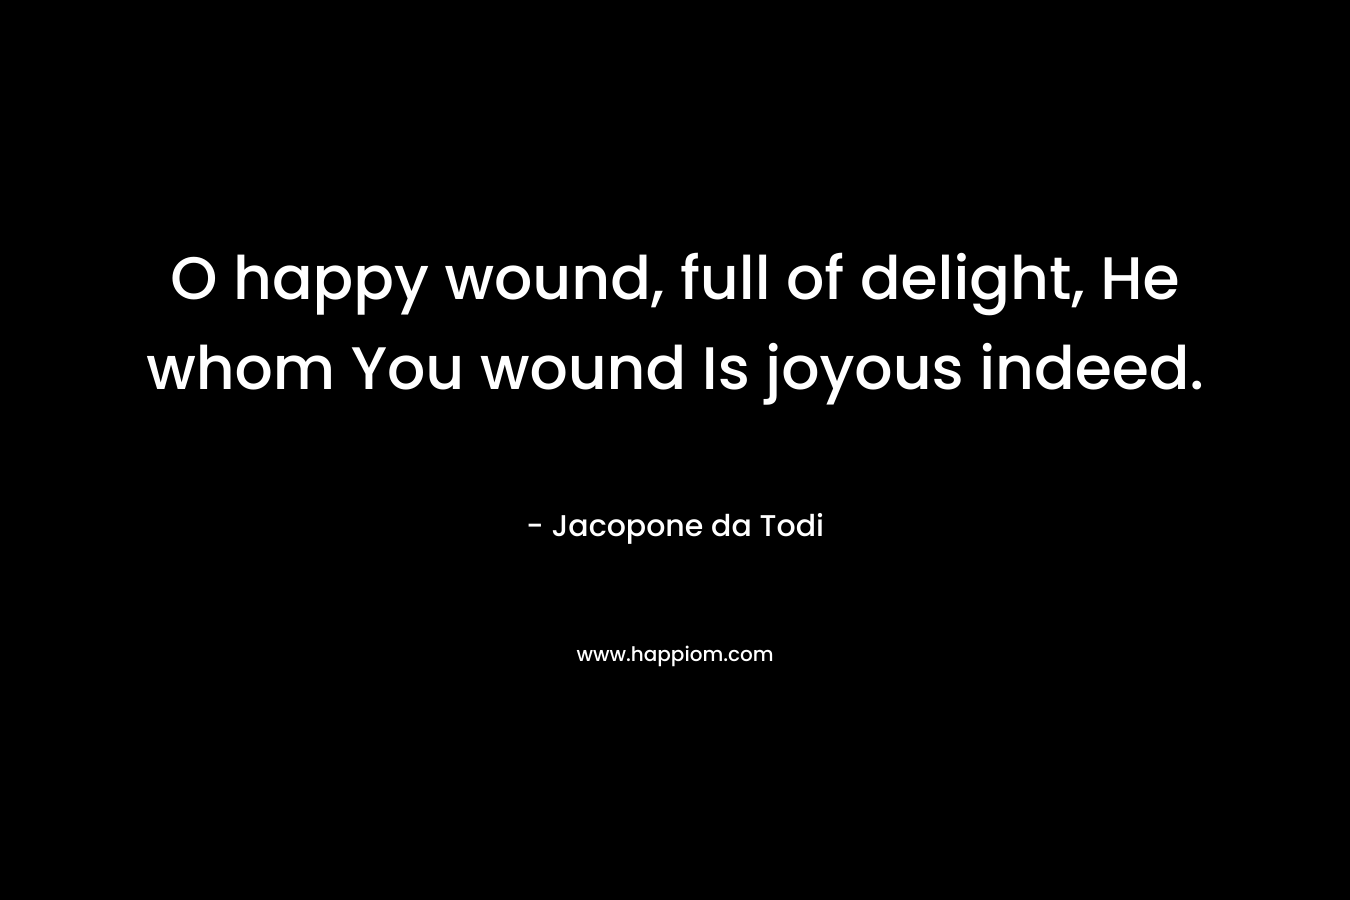 O happy wound, full of delight, He whom You wound Is joyous indeed.